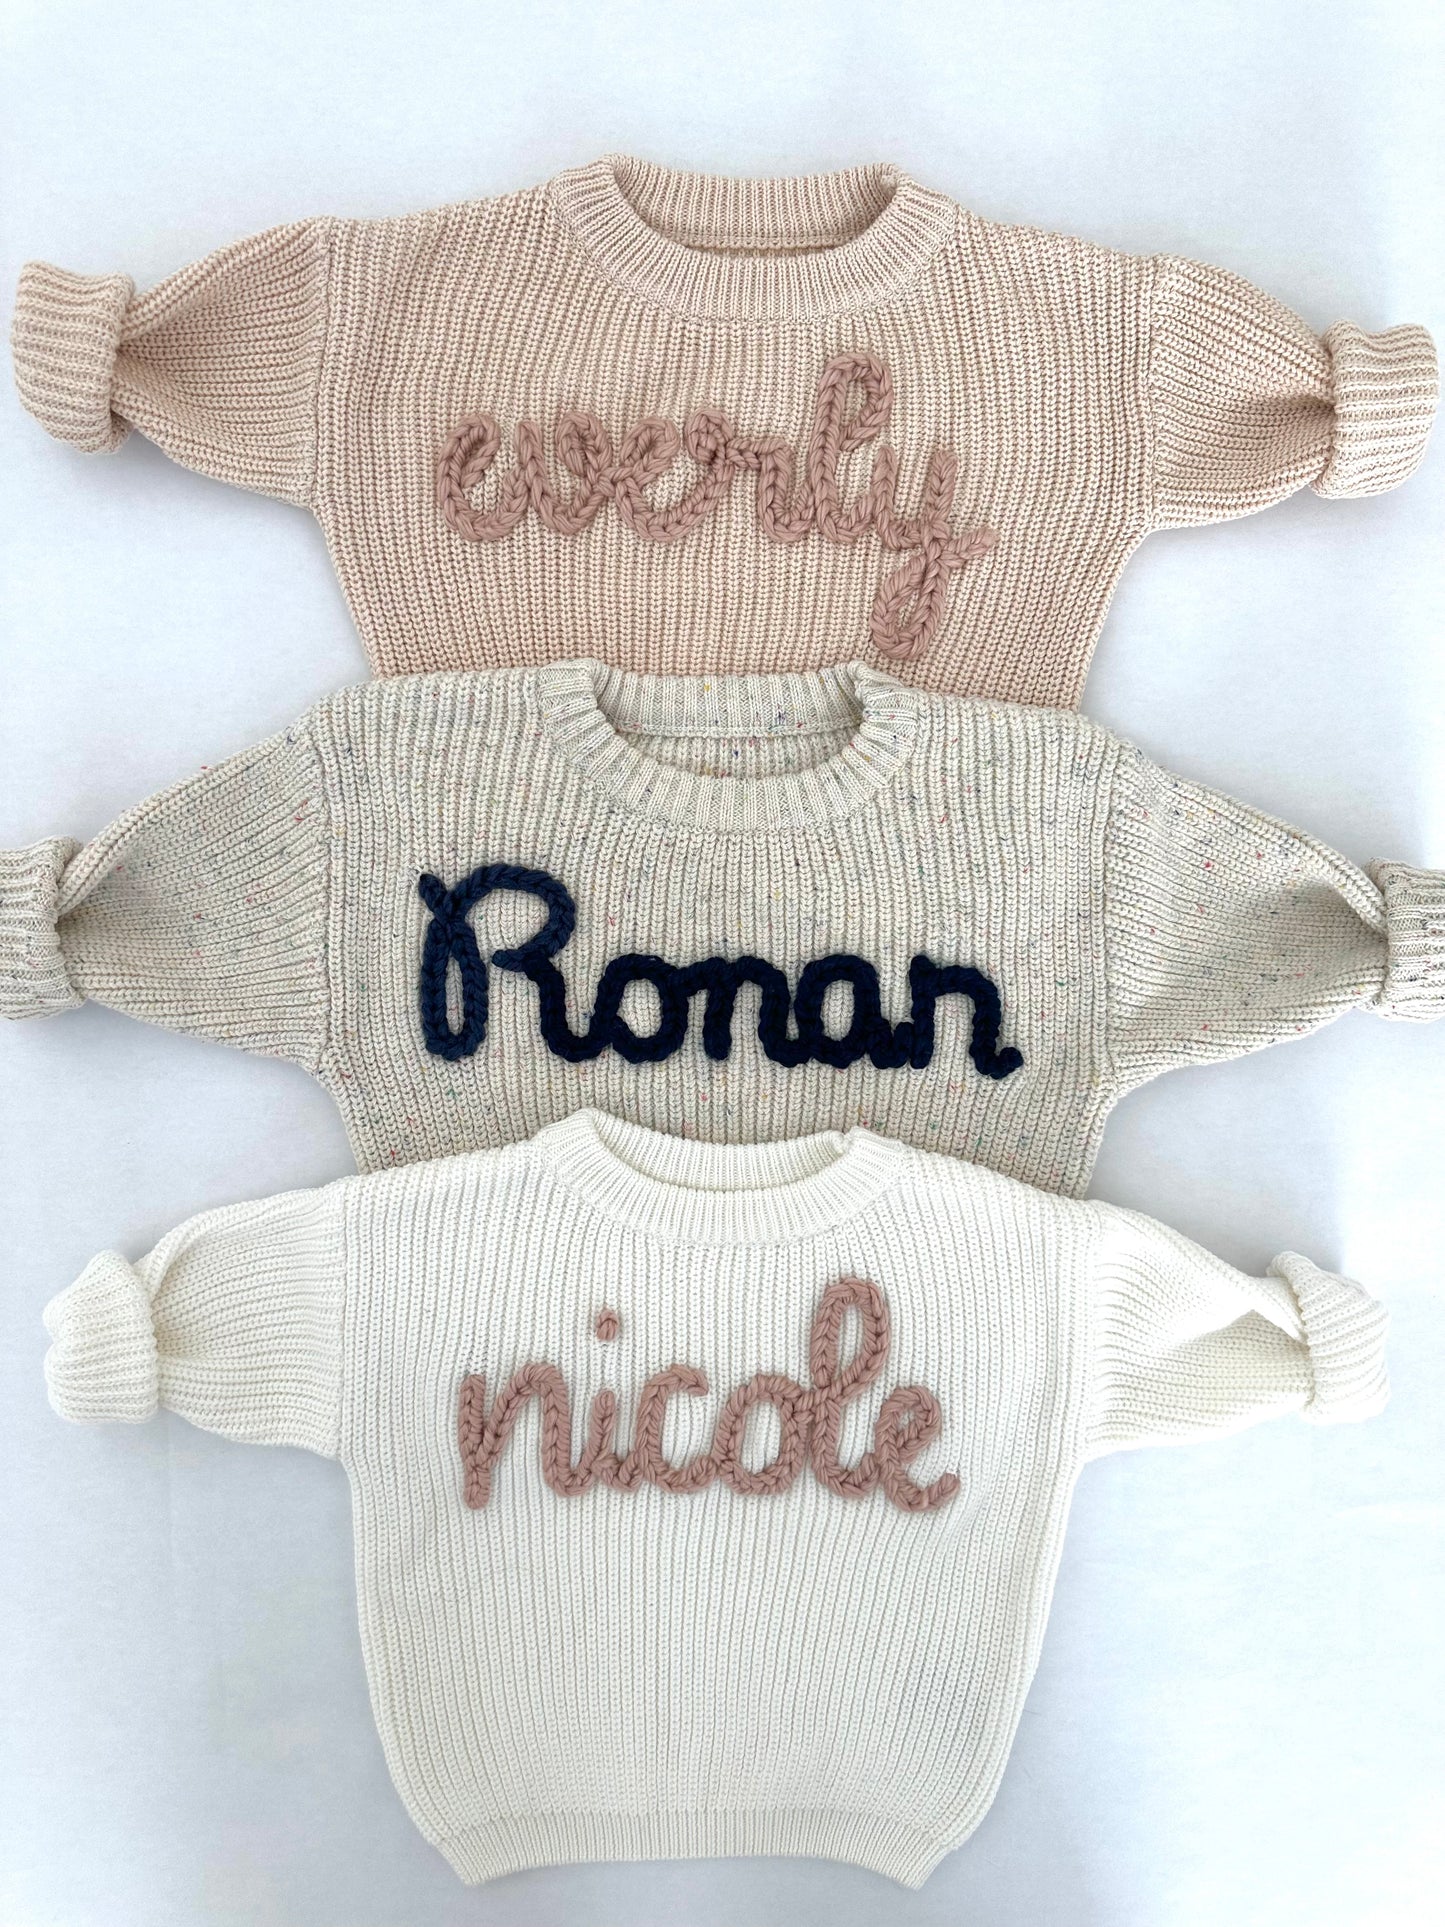 Customized Knitted Sweater